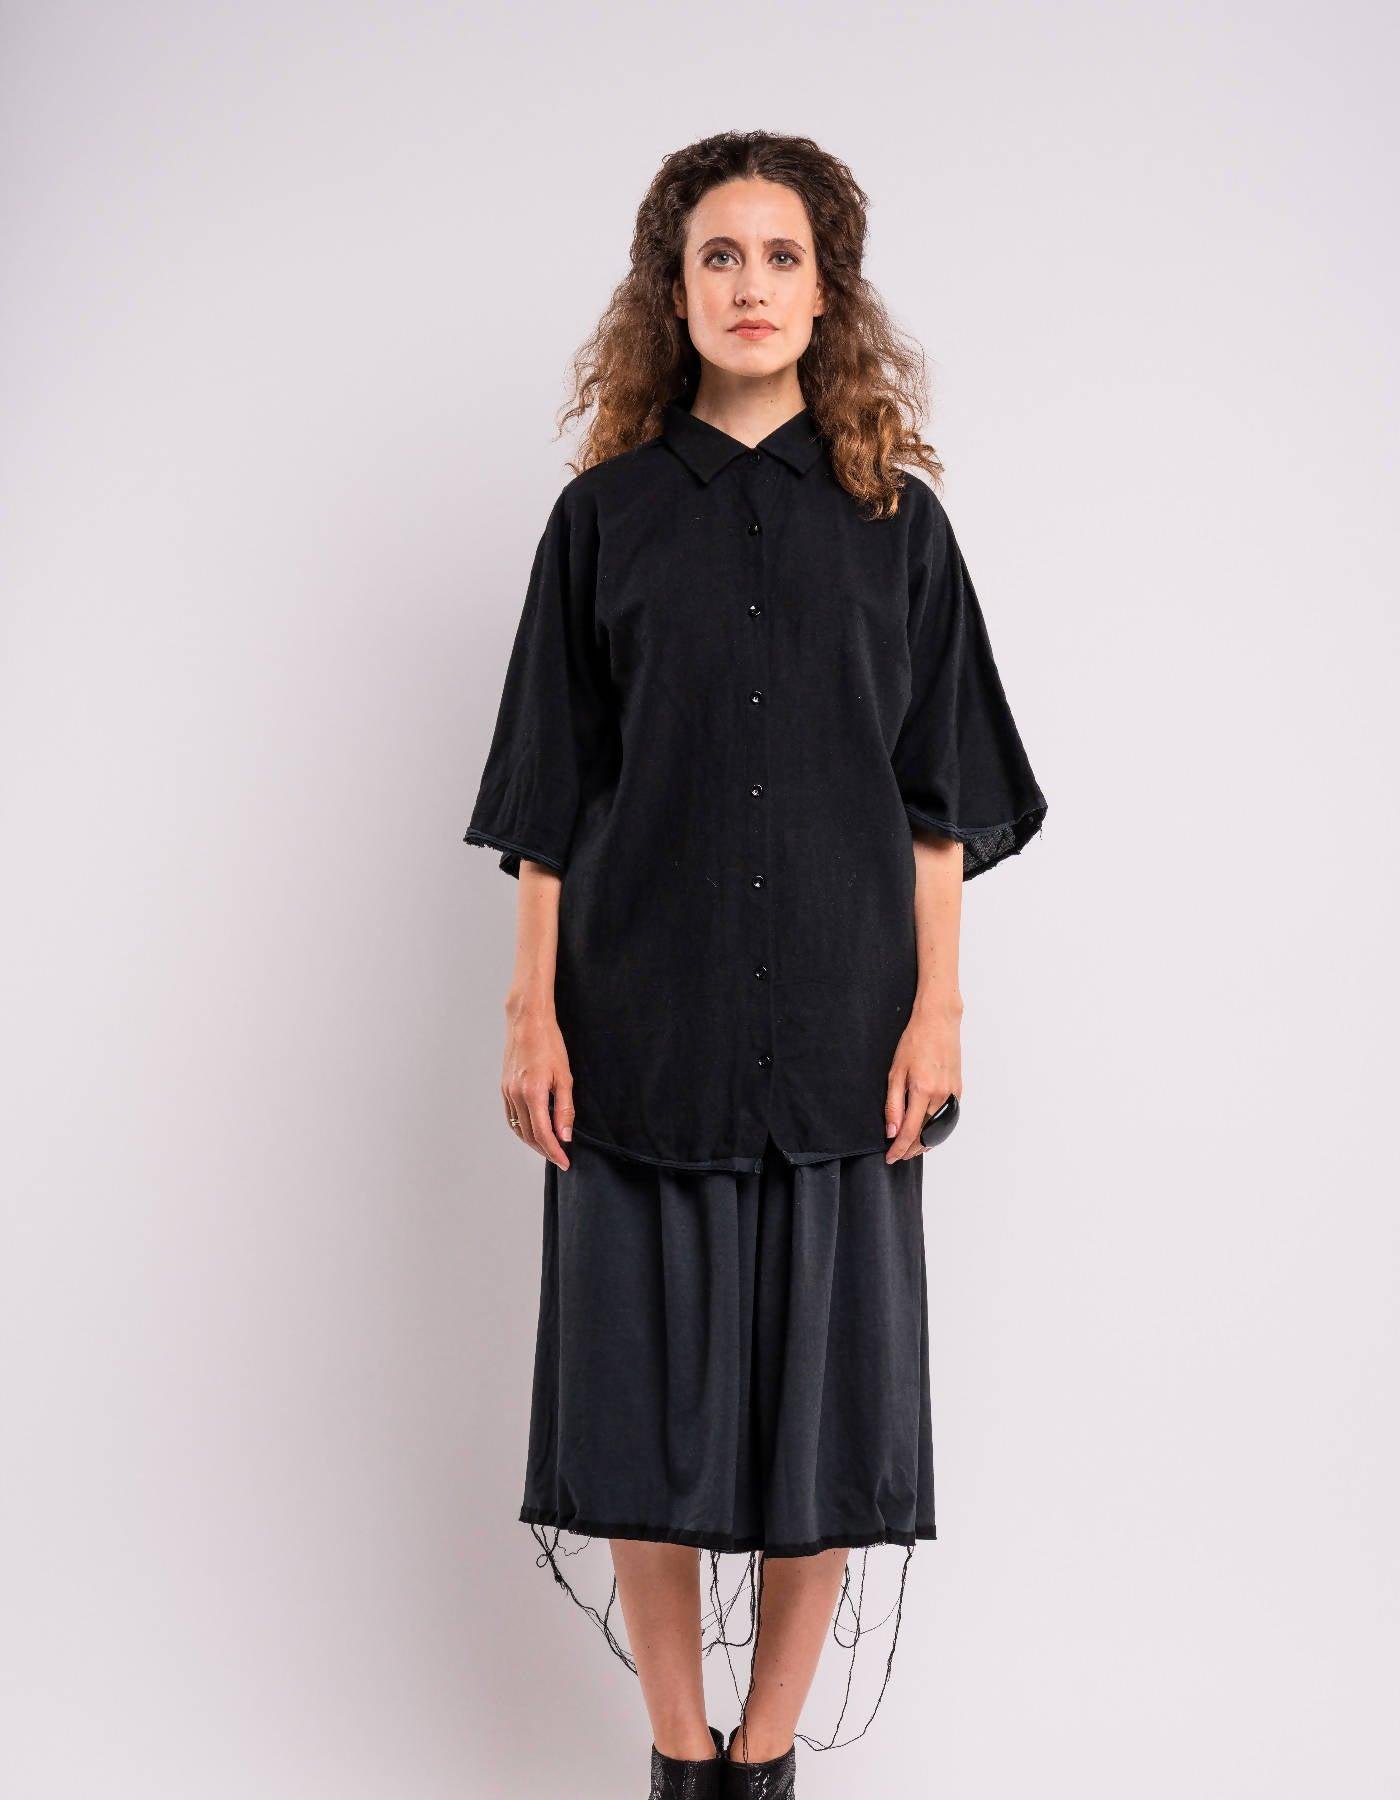 Raw Skirt by ANOIR COLLECTION